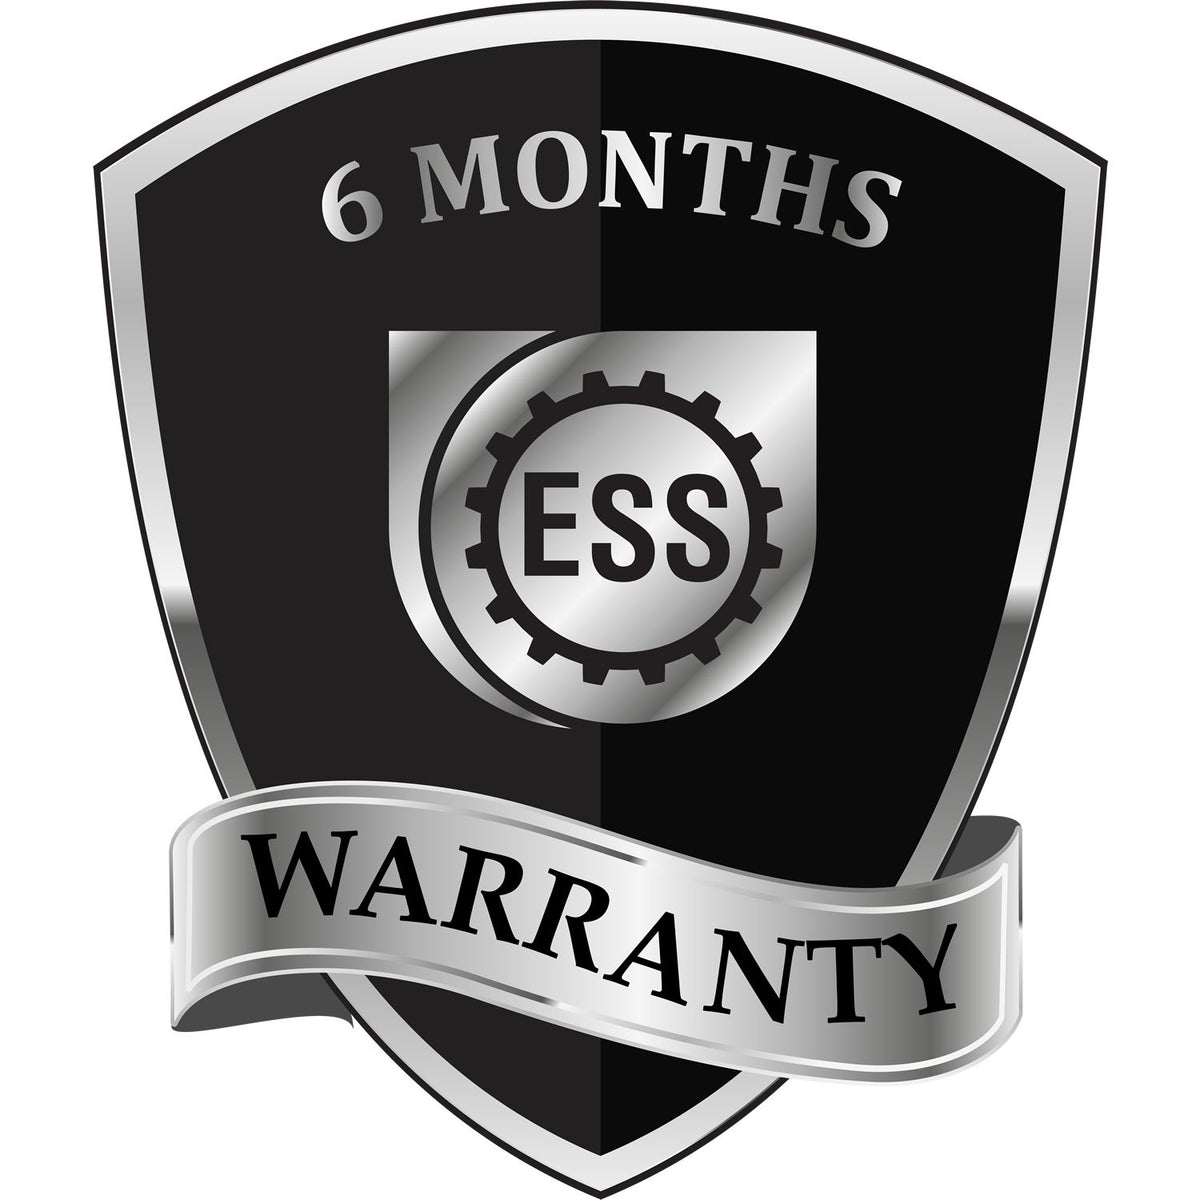 A badge or emblem showing a warranty icon for the Heavy-Duty Kansas Rectangular Notary Stamp